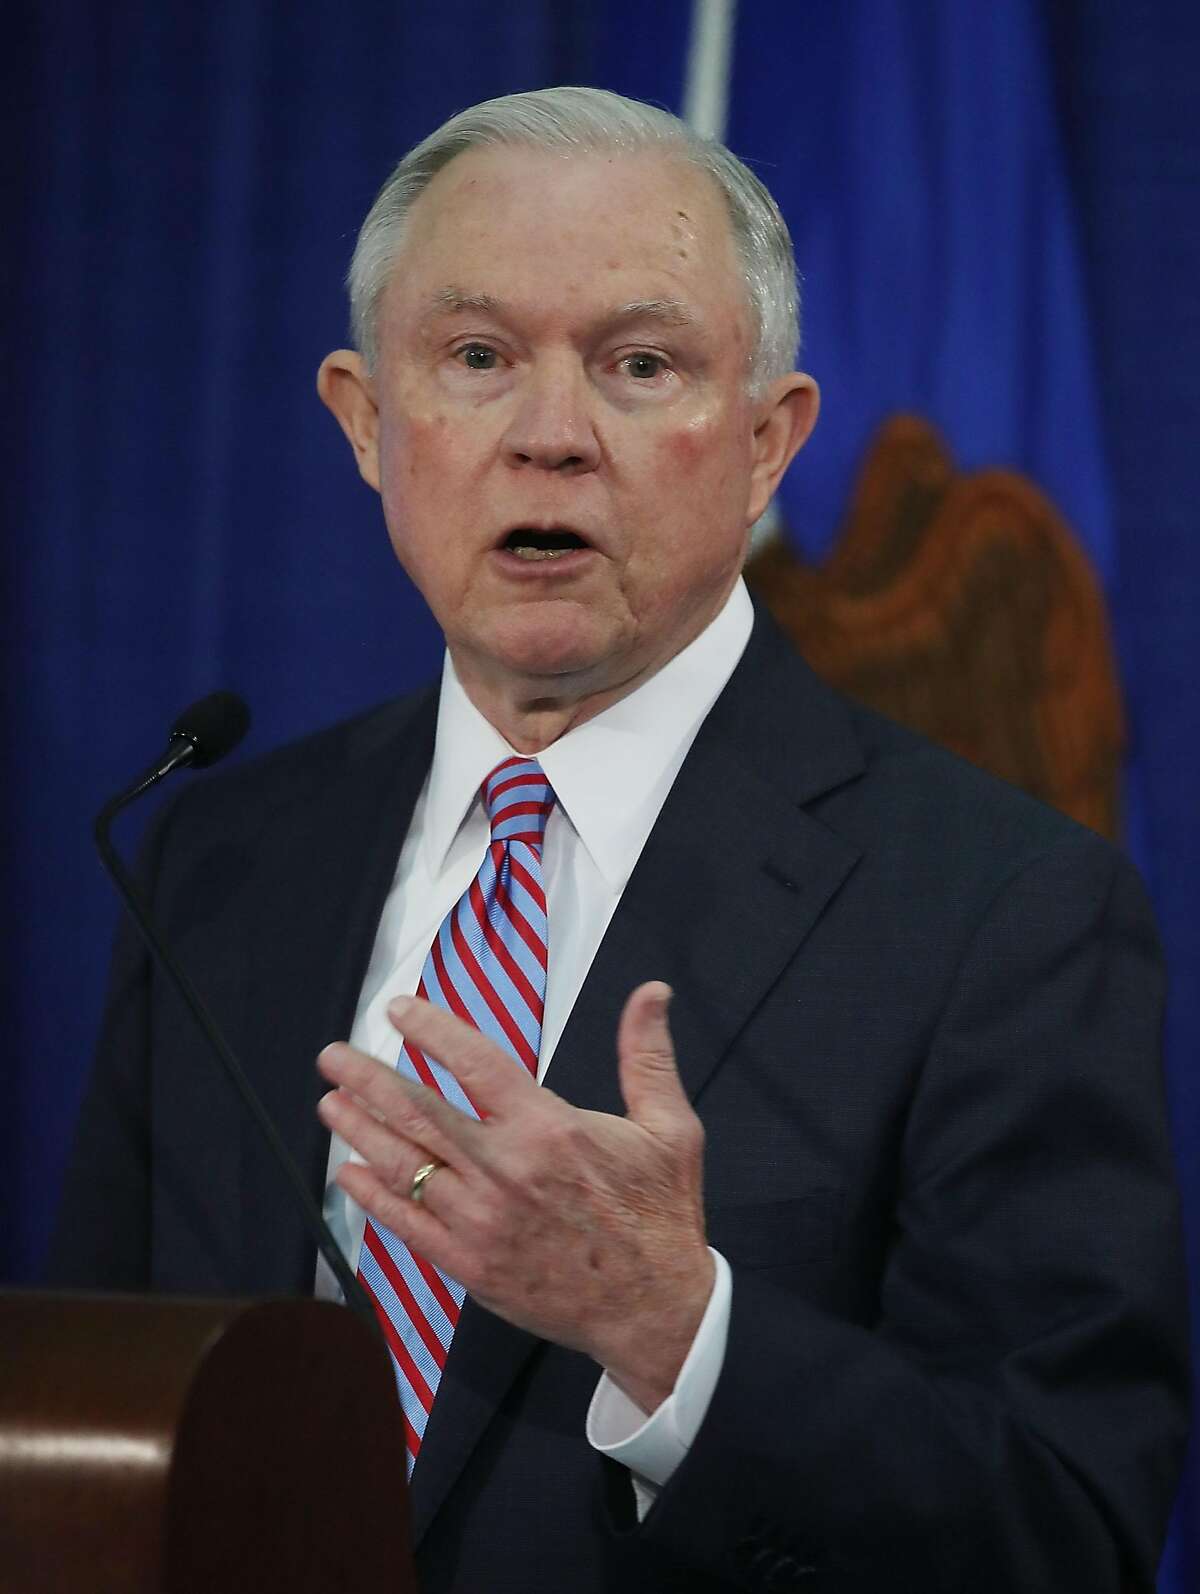 WASHINGTON, DC - JUNE 29: Attorney General Jeff Sessions speaks during a Hate Crimes Subcommittee summit on June 29, 2017 in Washington, DC. The meeting gave stakeholders the opportunity to offer imput to the committee before it makes its recommendations to the attorney general on what the Department of Justice can do to improve reporting, investigation and prosecution of hate crimes. (Photo by Mark Wilson/Getty Images)